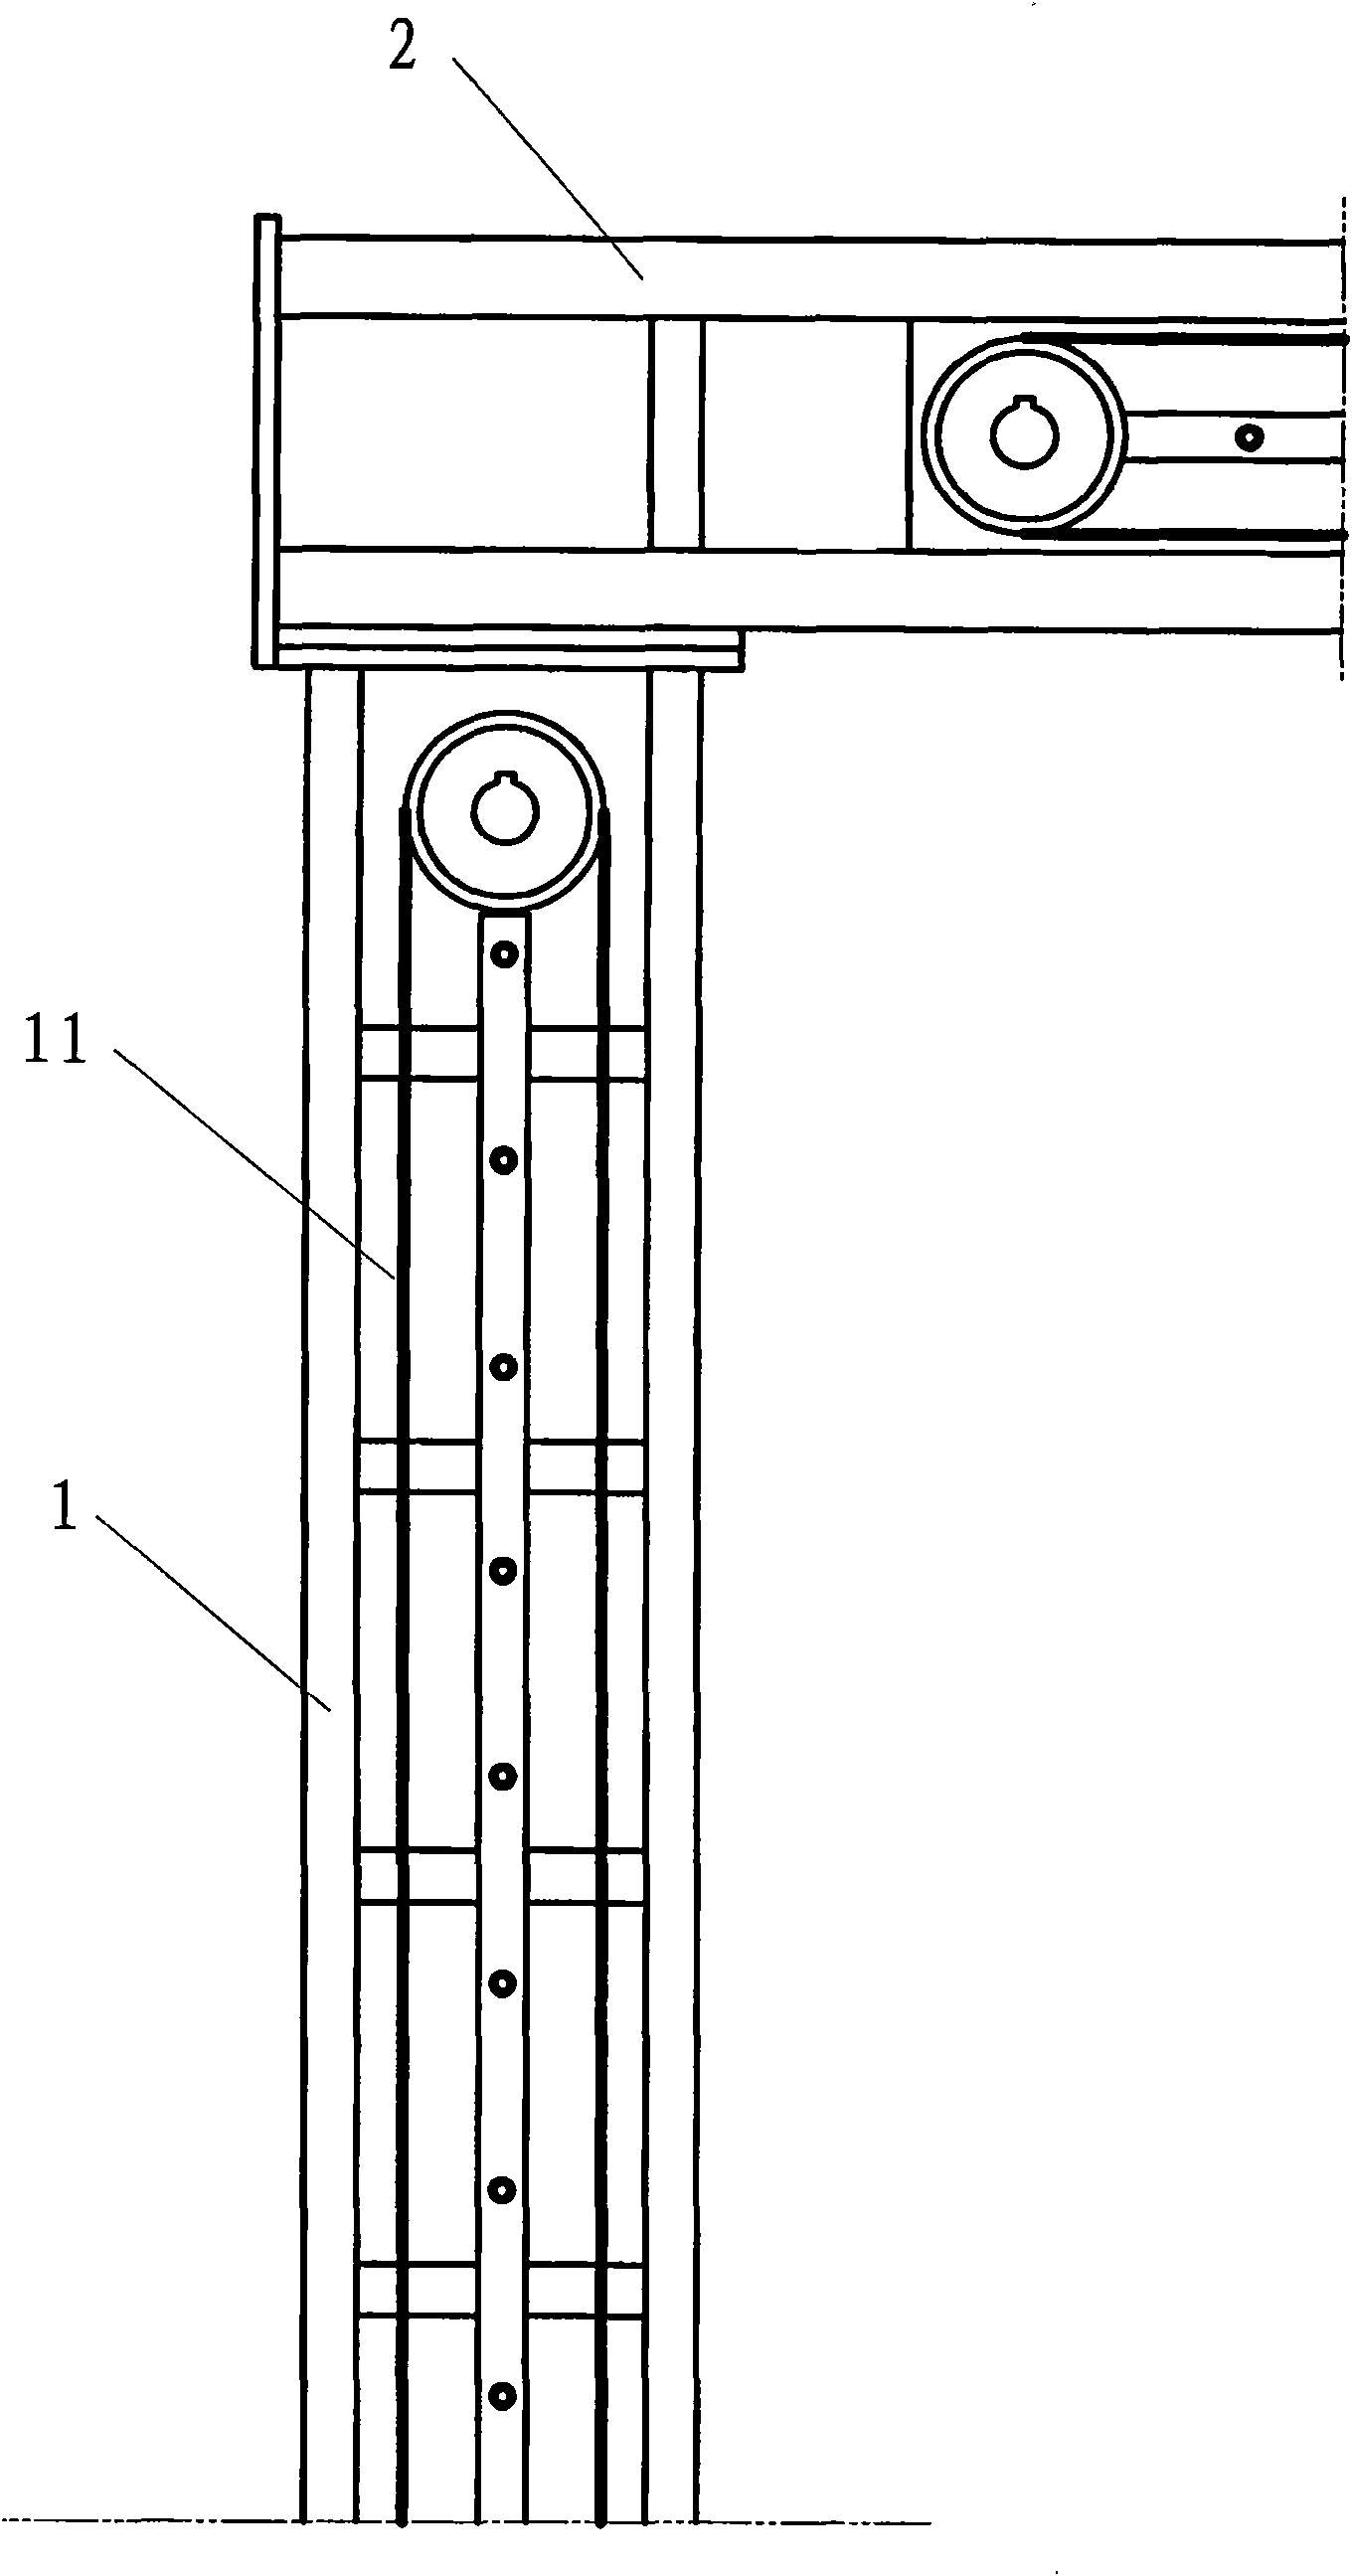 Machine for measuring outline dimension of vehicle